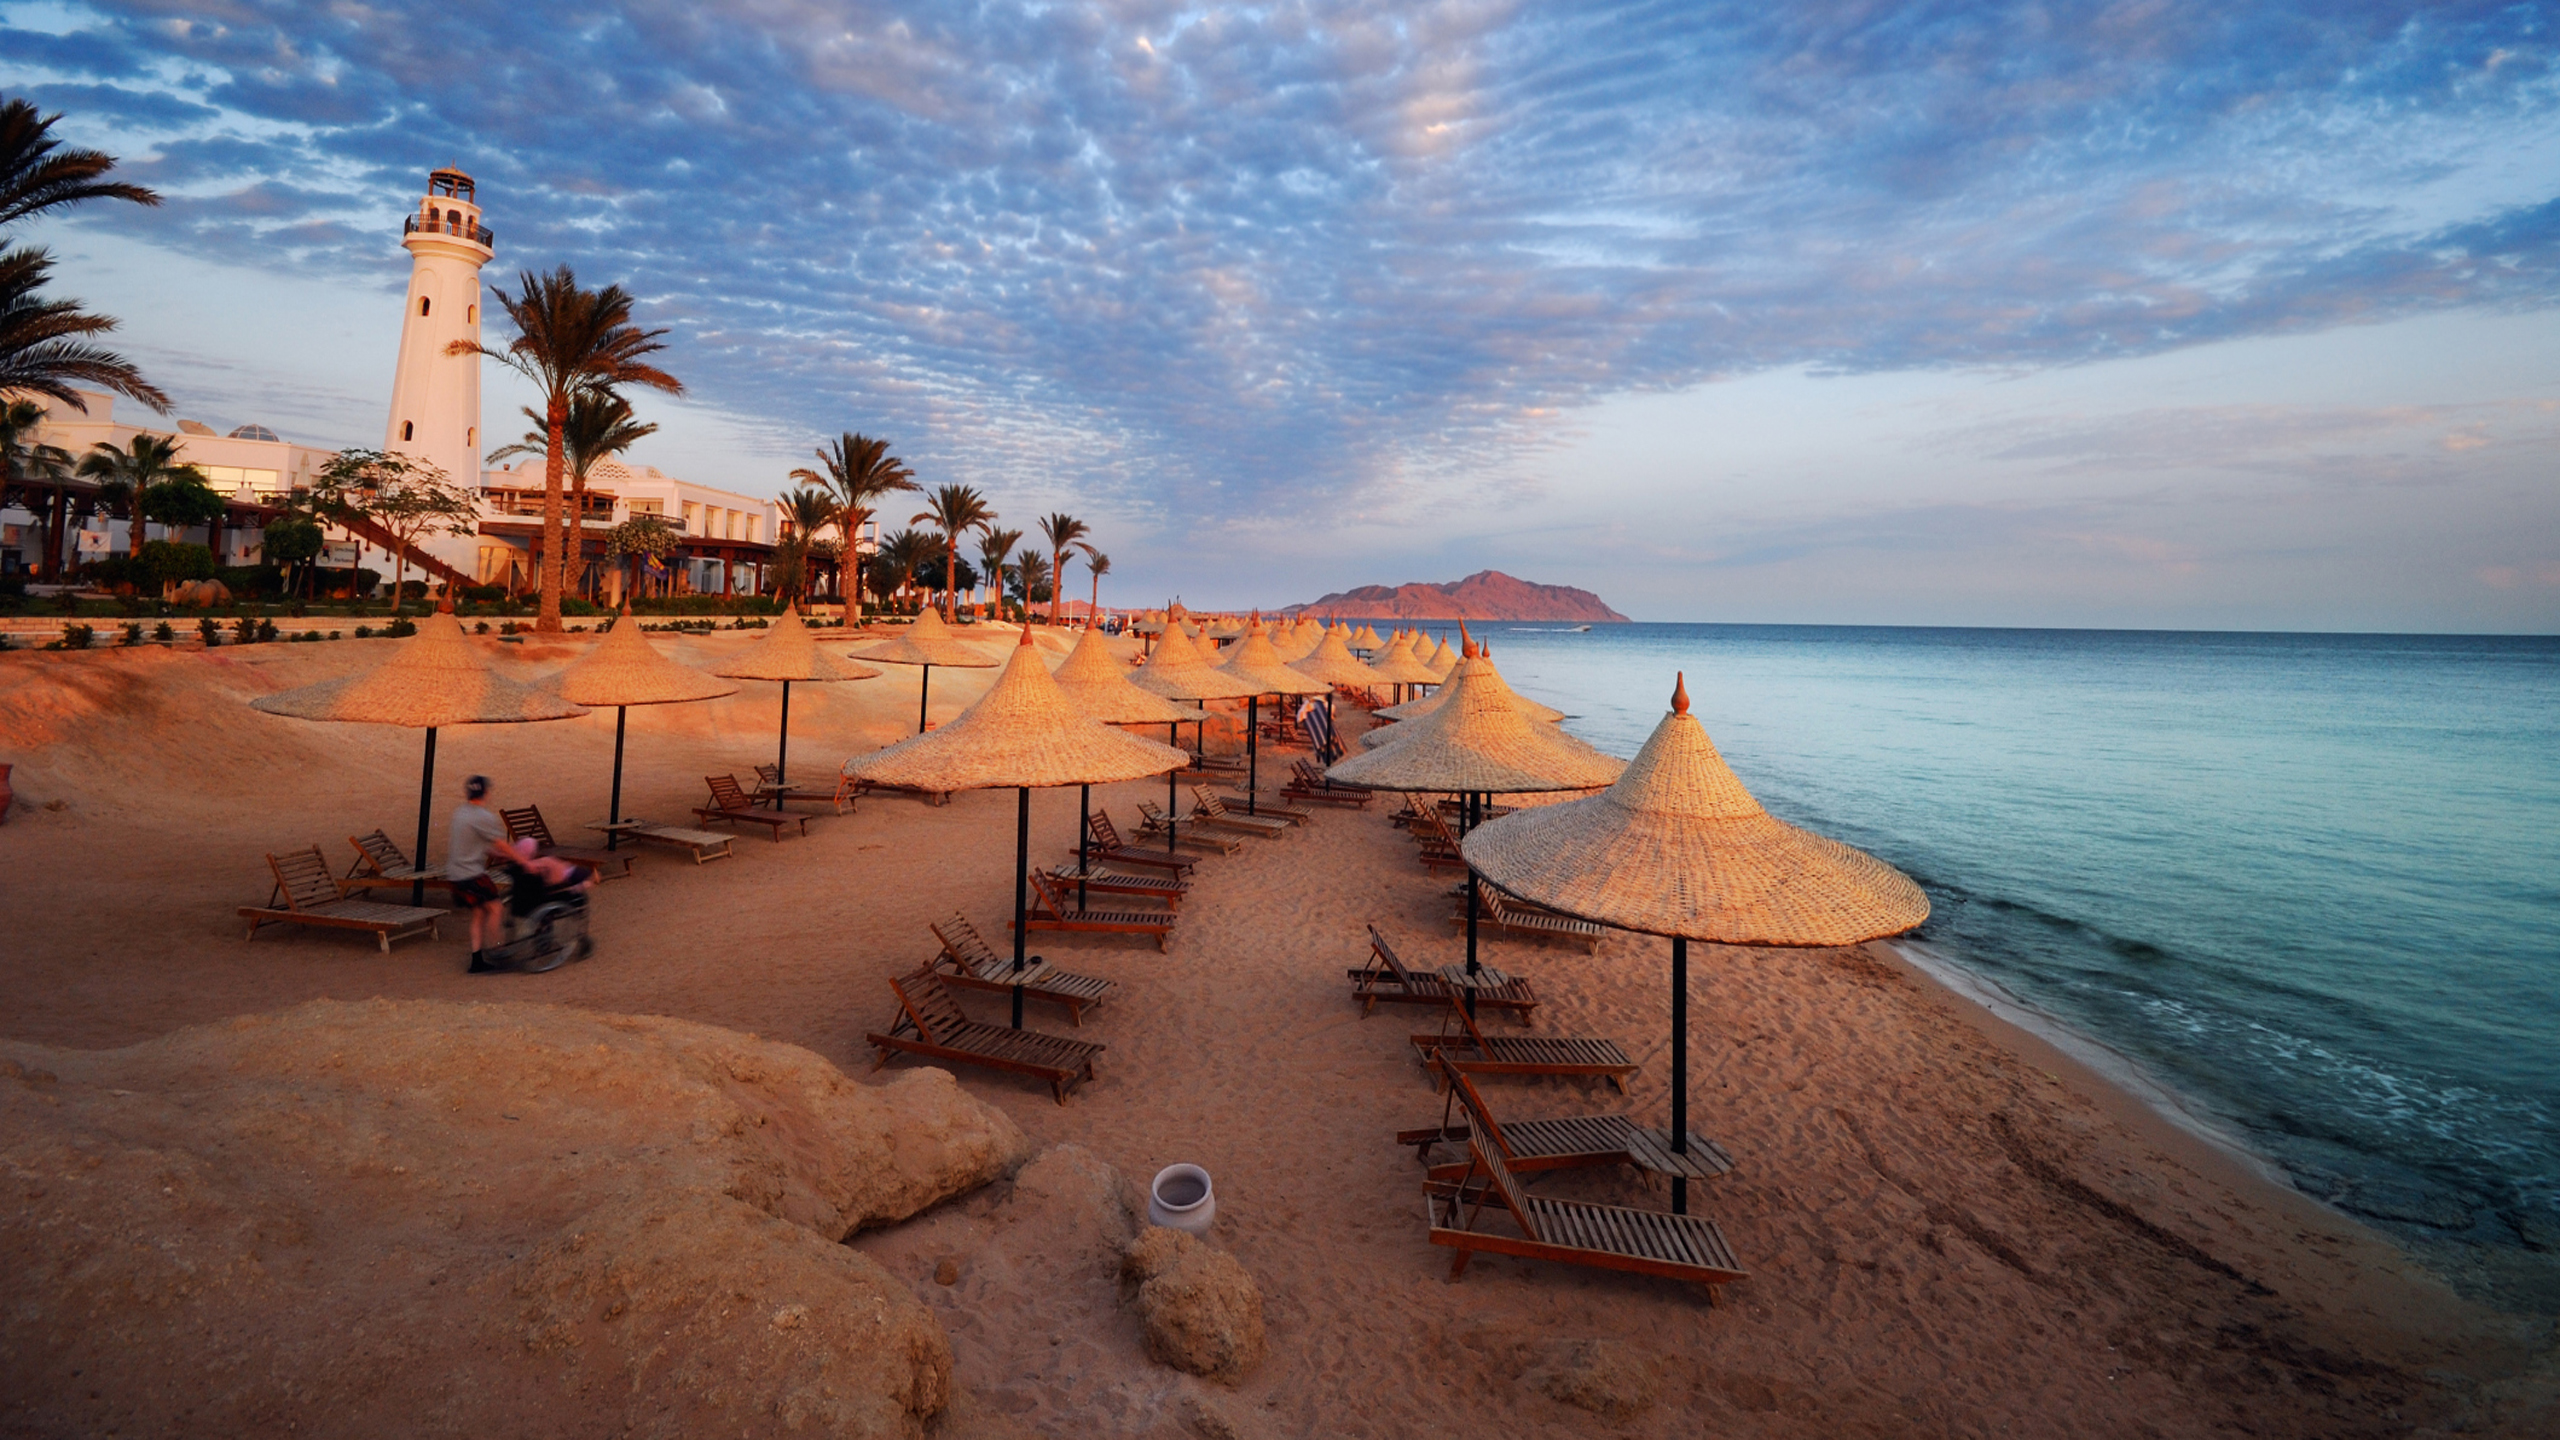 Sharm El Sheikh Tourist Town Between The Desert Of The Sinai Peninsula And The Red Sea In Egypt Sandy Beaches Clean Waters Coral Reefs Wallpaper HD 2560x1440, Wallpaper13.com